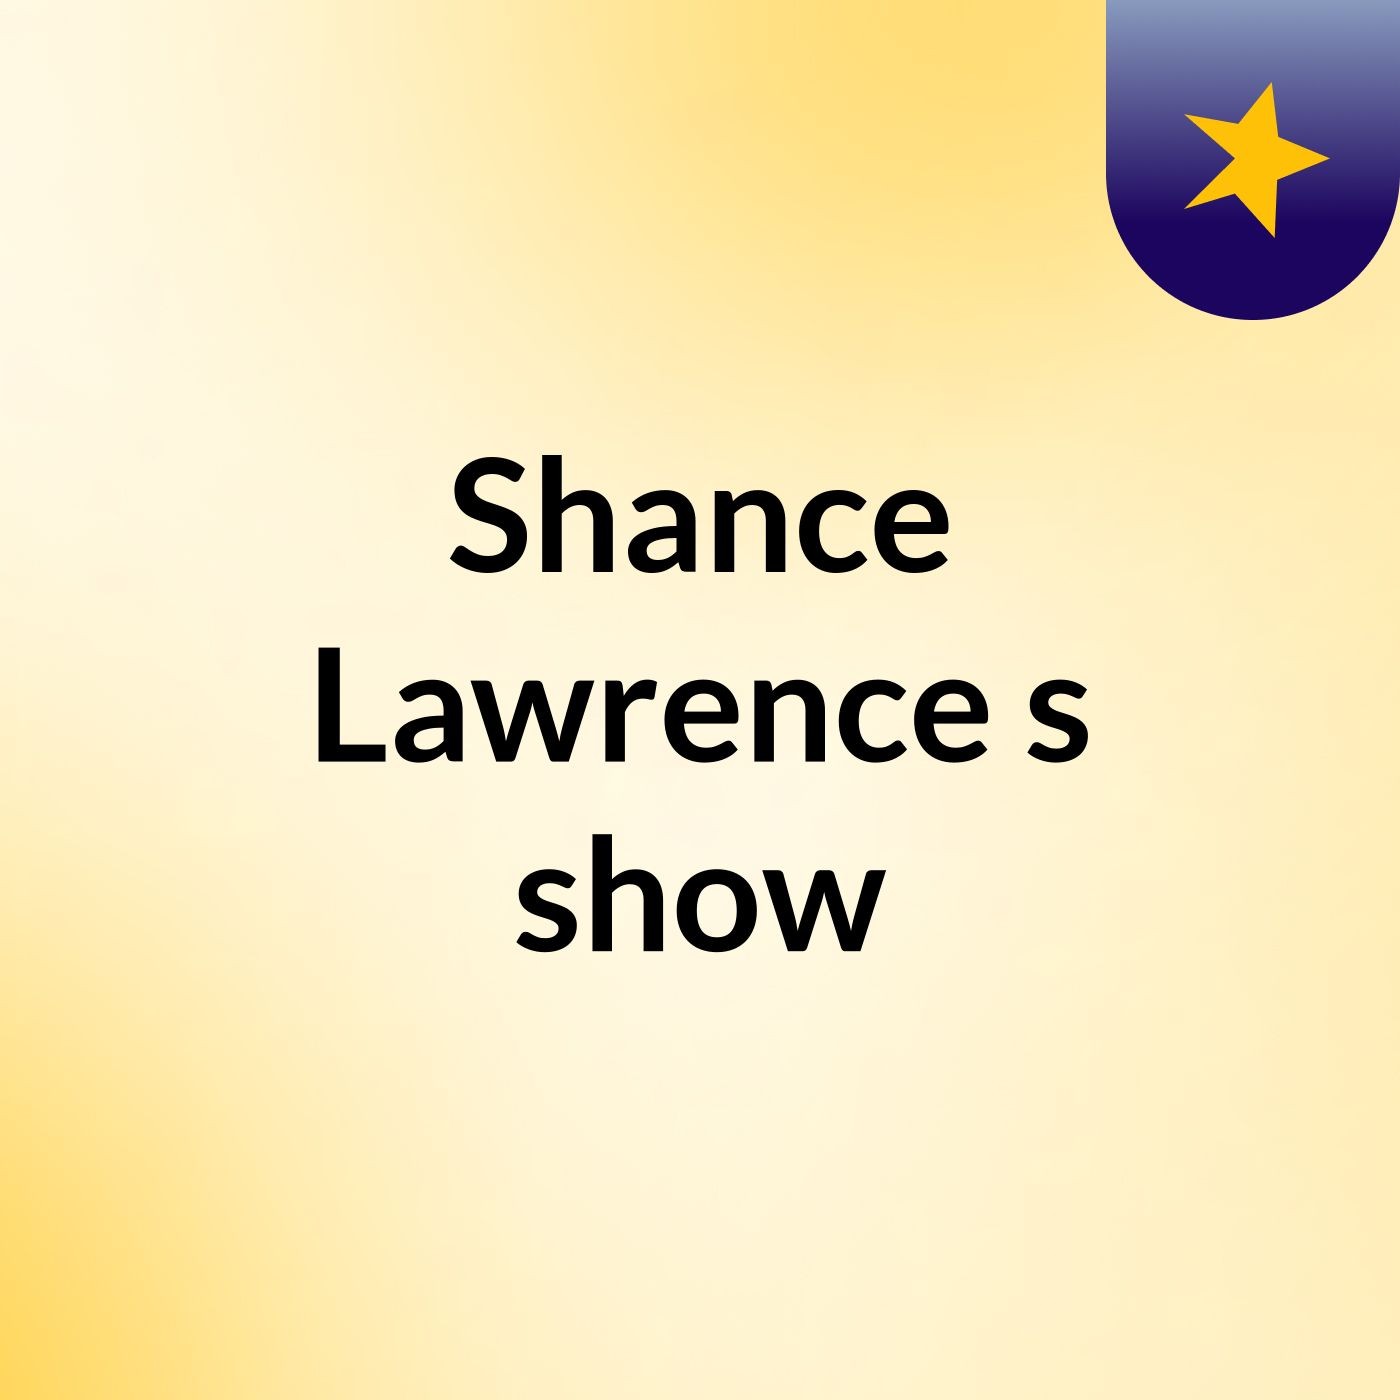 Shance Lawrence's show